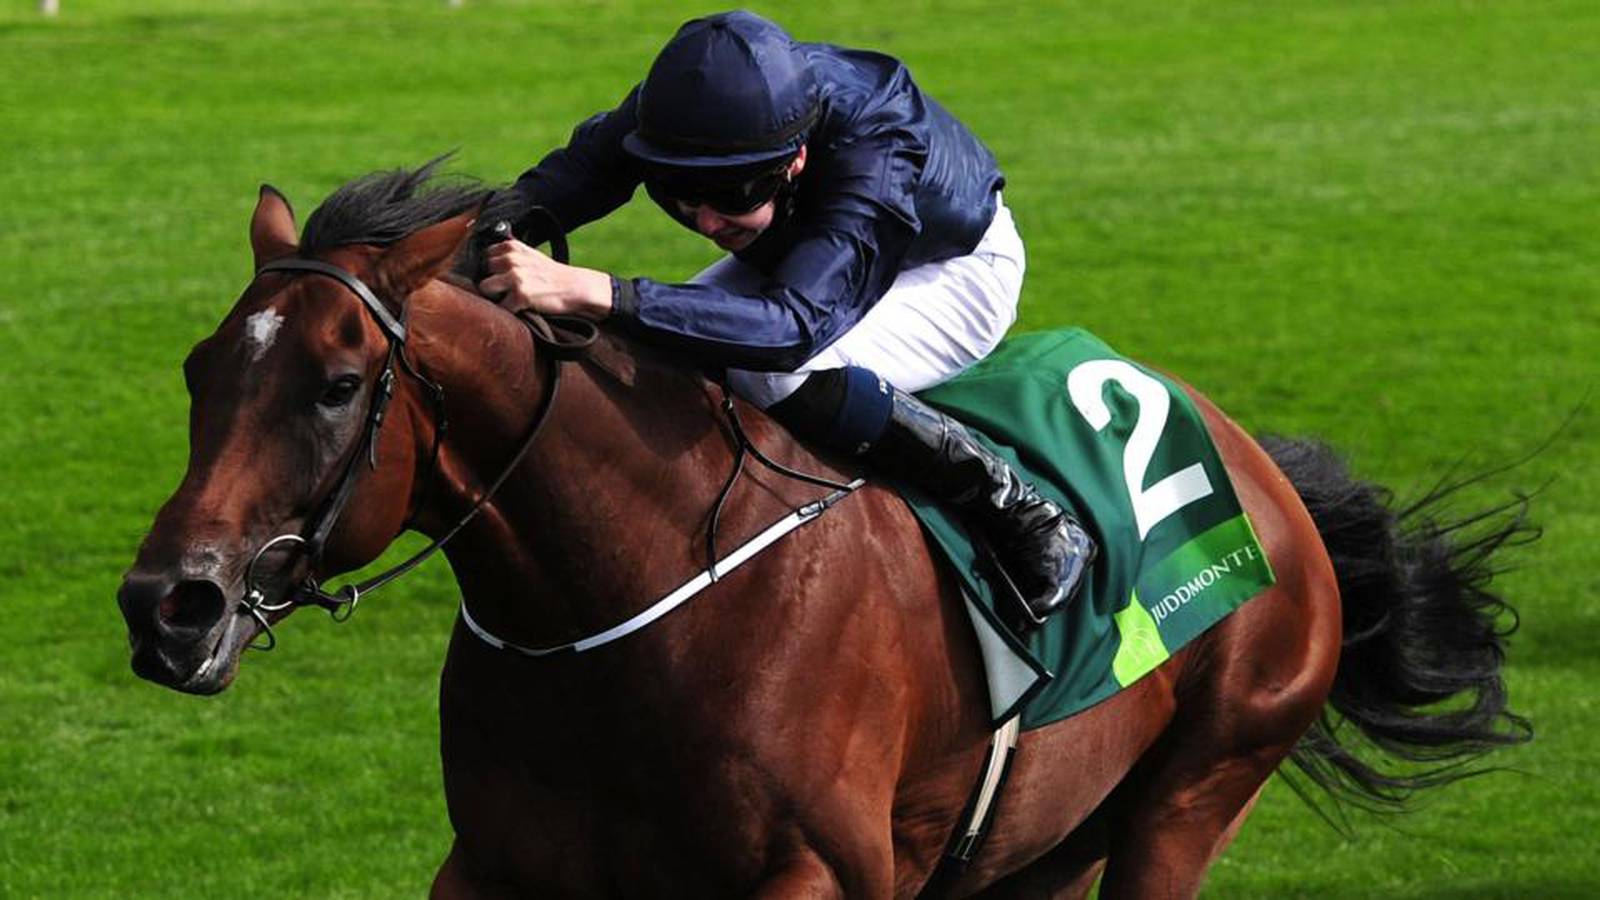 Ryan Moore Set For Ballydoyle Rides At Breeders Cup The Irish Times 1589